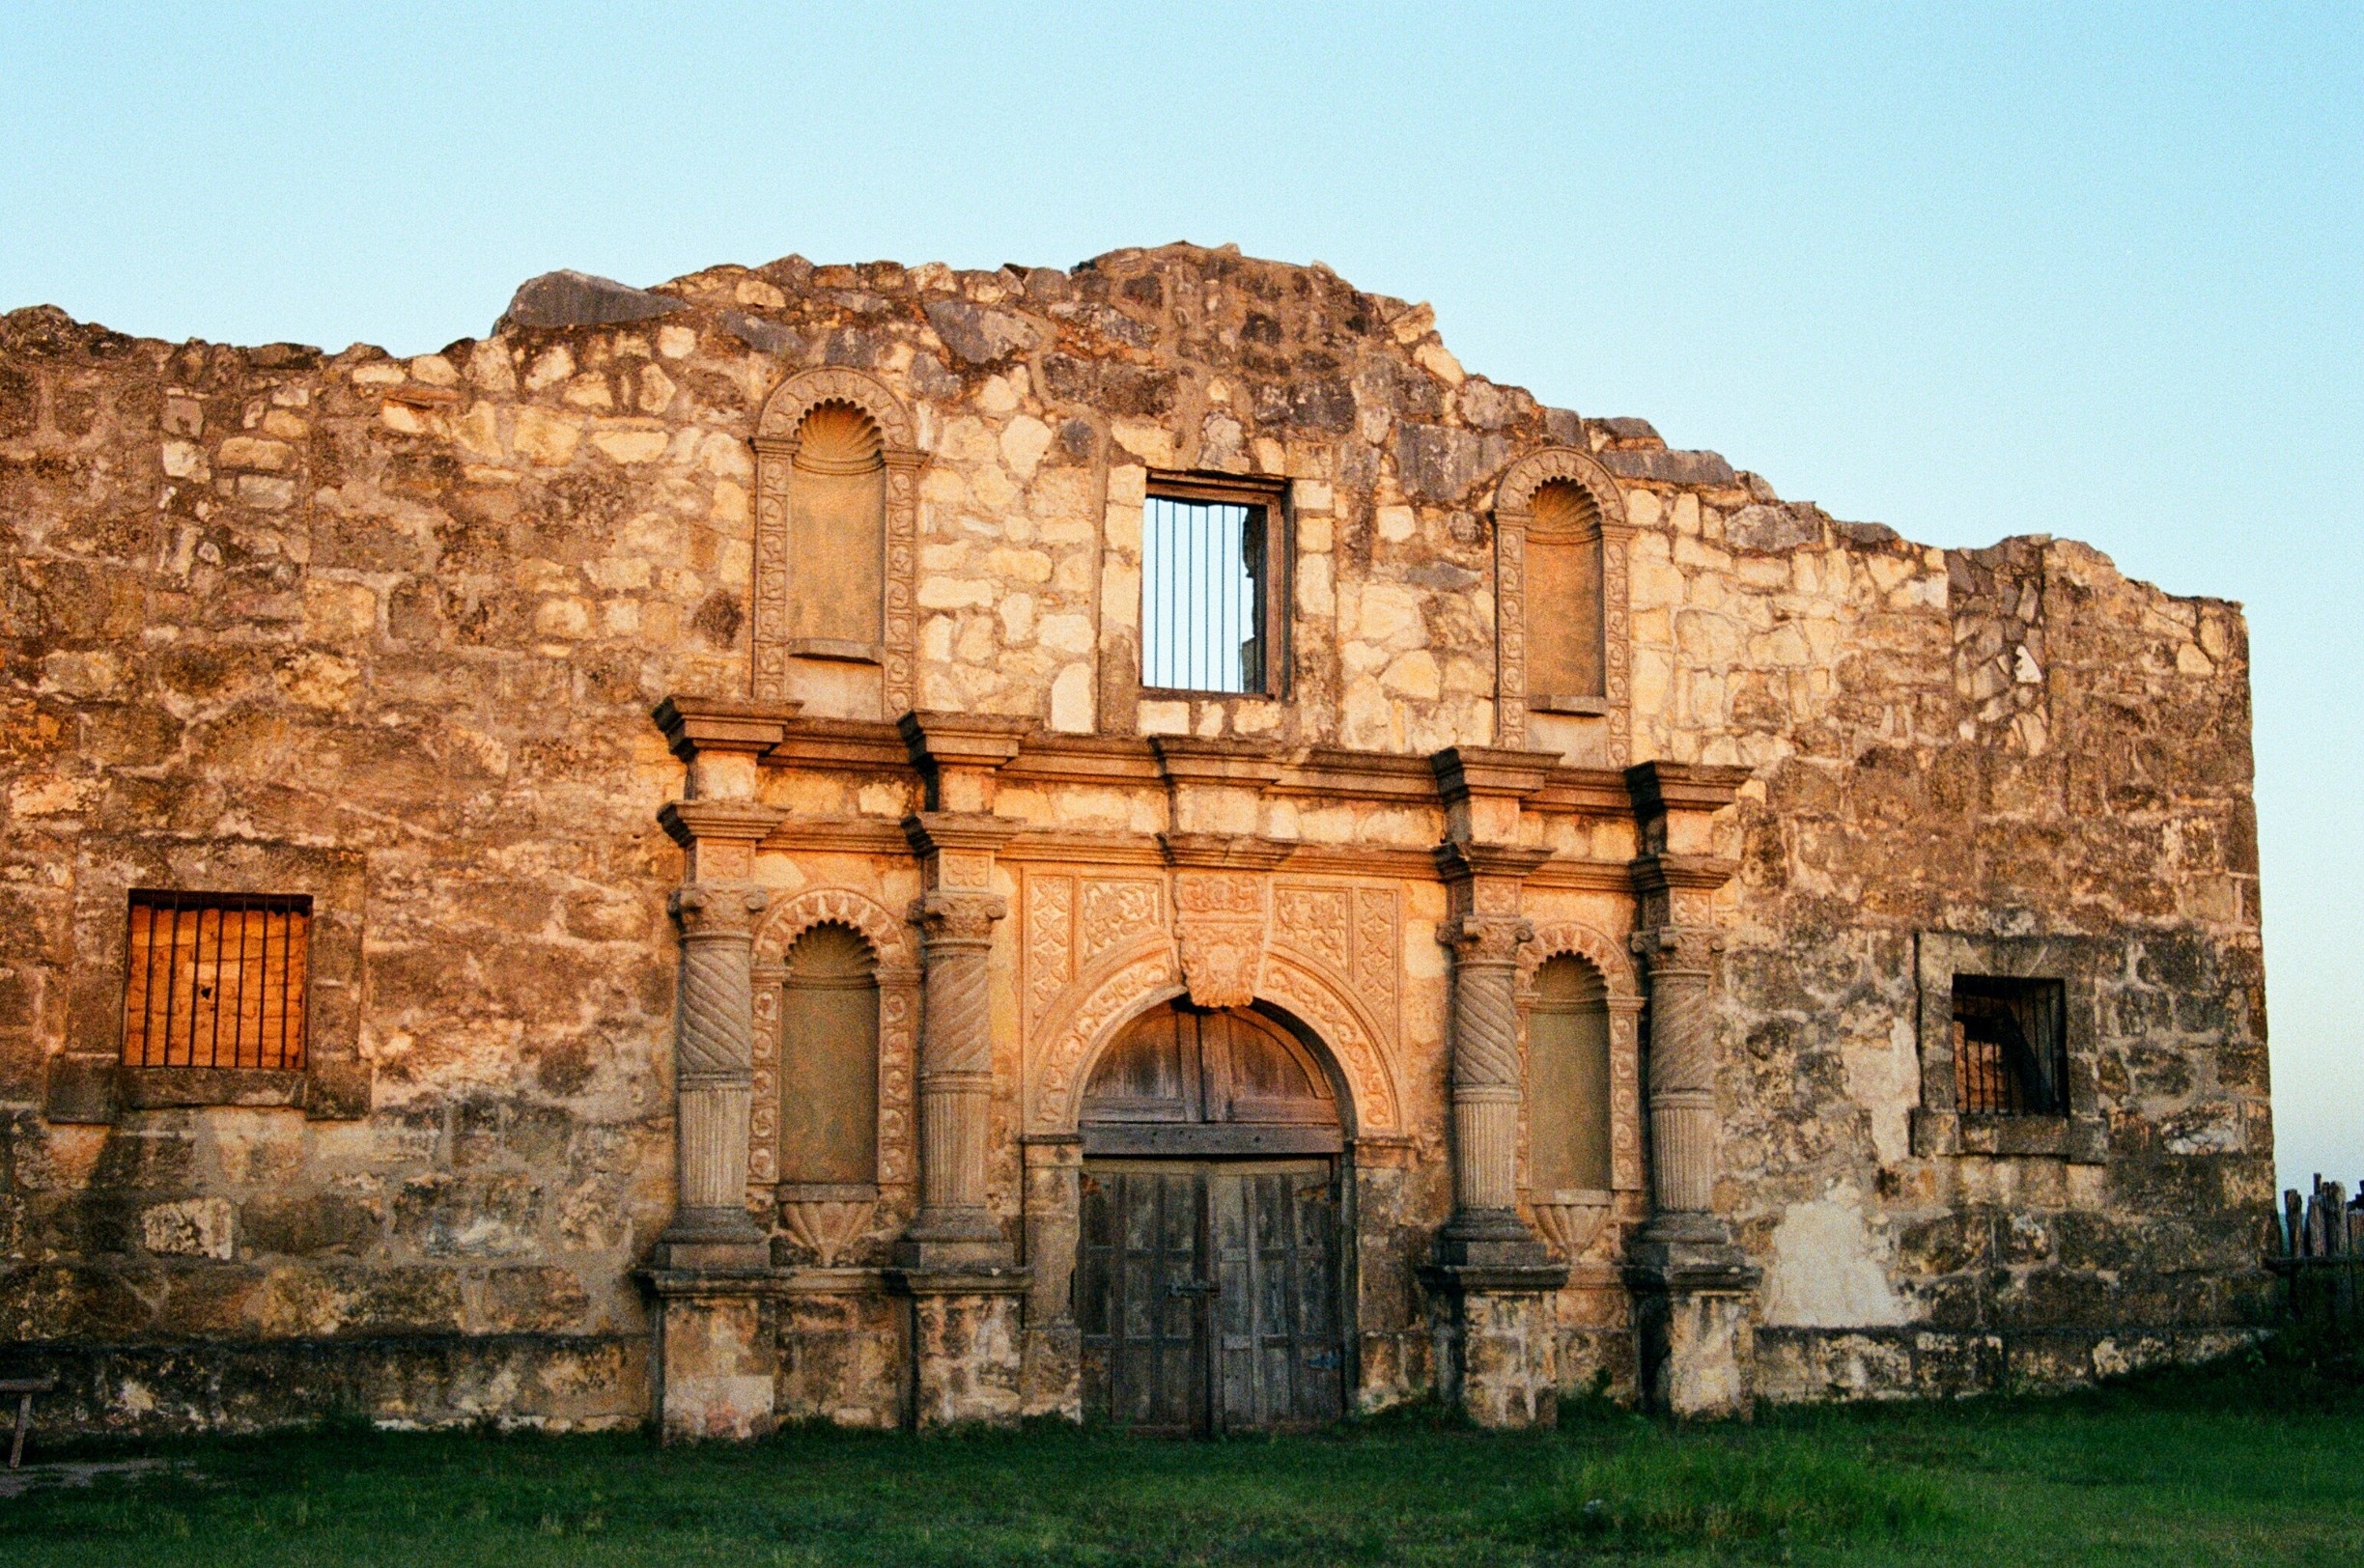 John Wayne had this built on Happy Shanahan's Ranch just north of Bracketville TX.  Replica of the Original Alamo.  Only this one is facing East.  So I was able to capture the early morning light.  I spent three days and two nights photographing the grounds, during a full moon.

Most uplifting and inspiring shoot

#tnkarts #architecture #trover #johnwayne #thealamo #bracketvilletx